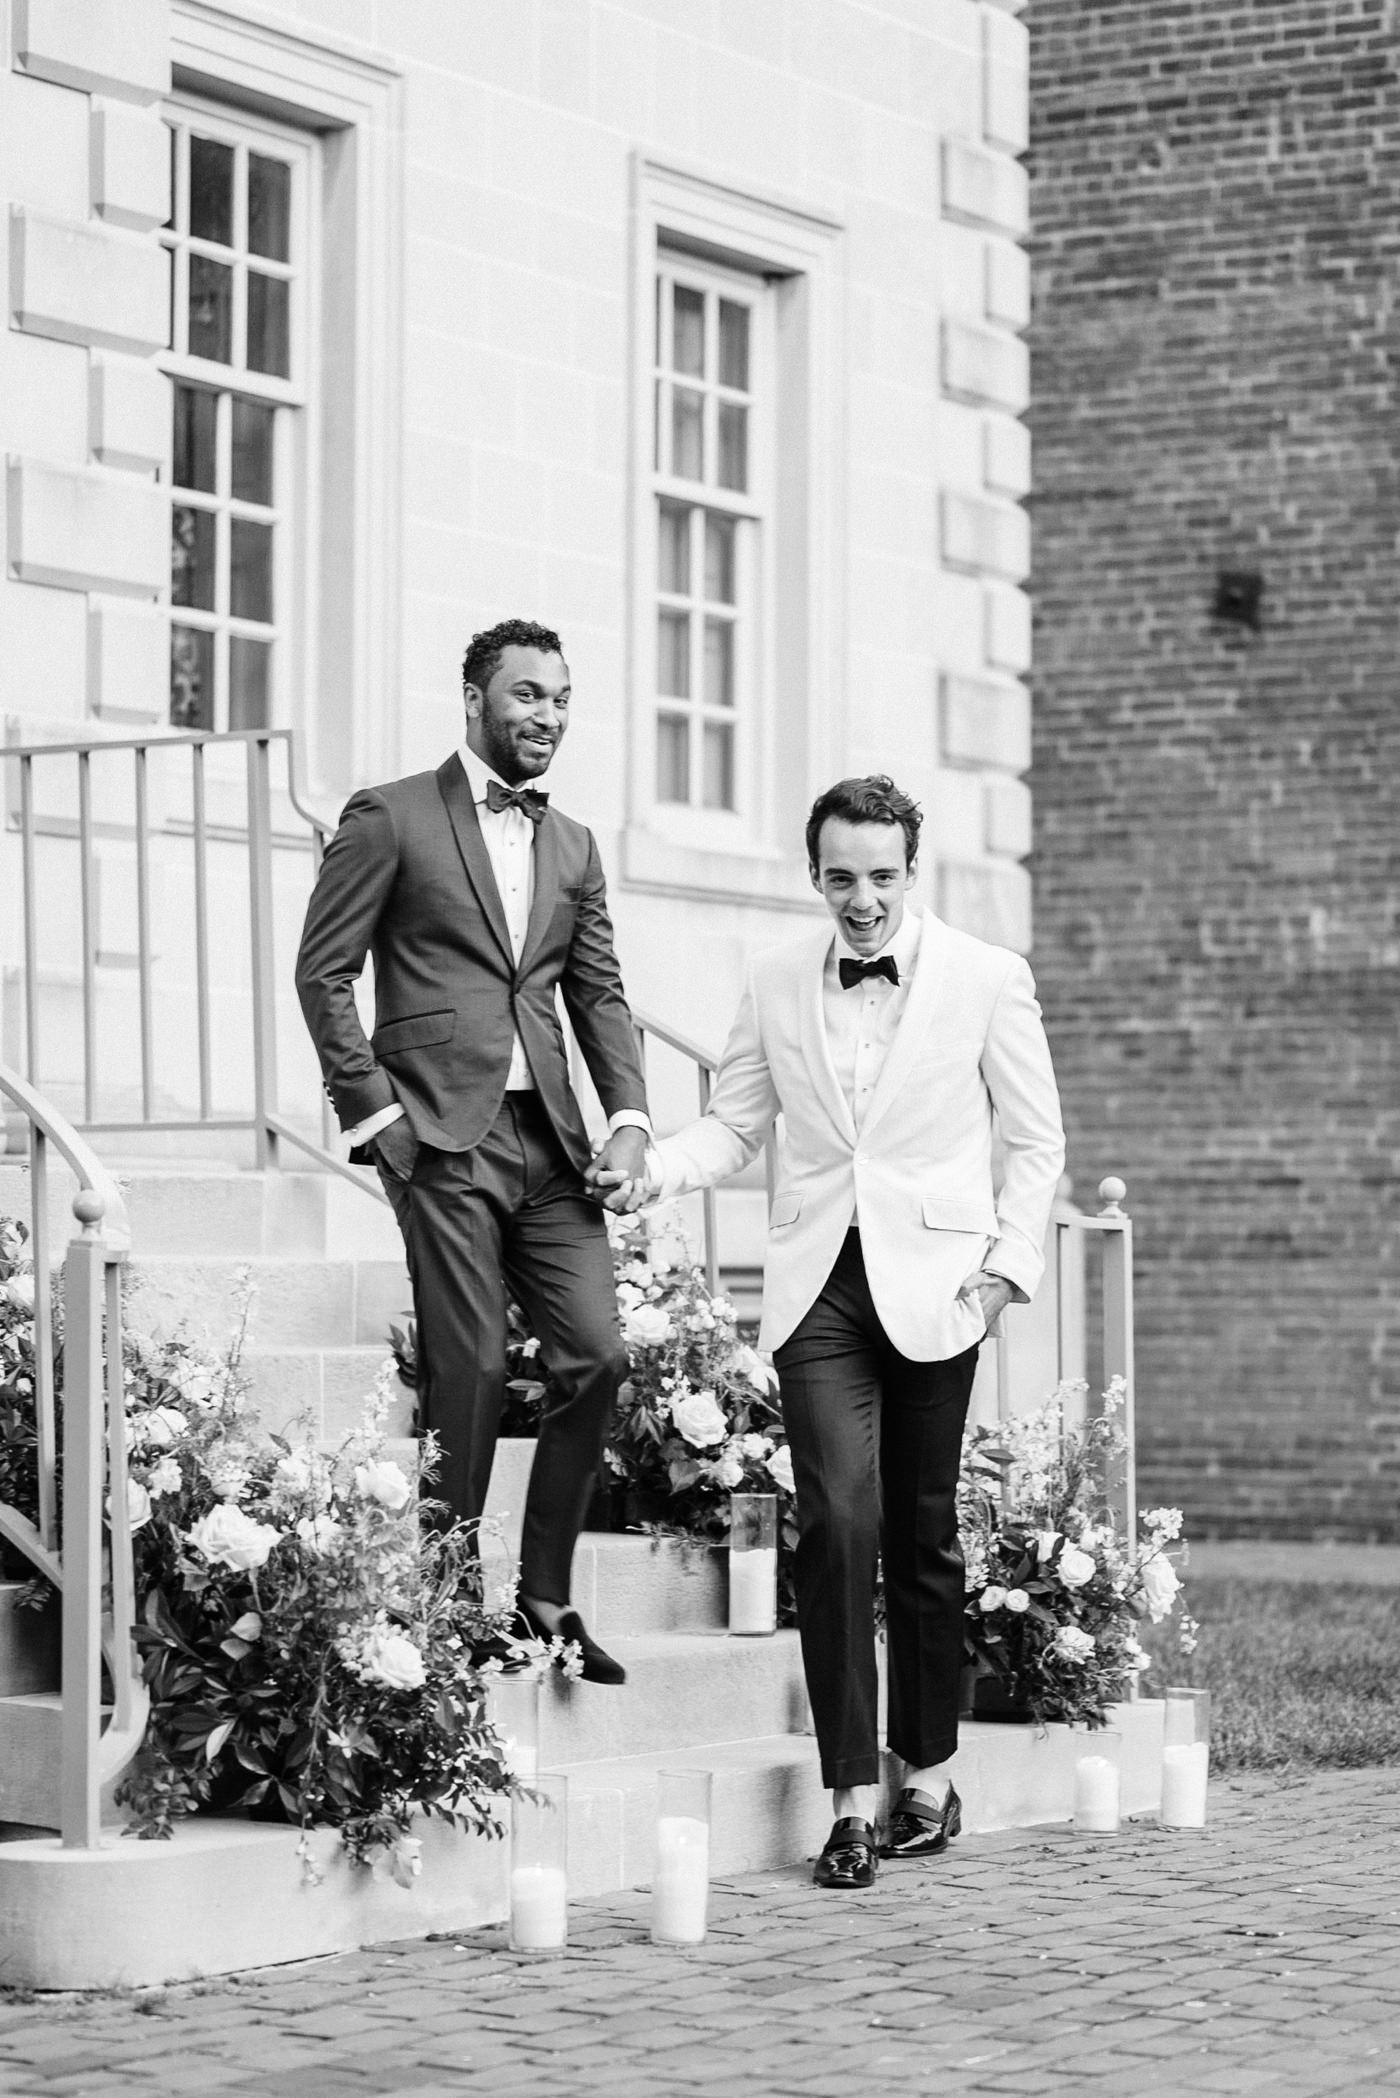 lgbtq friendly photographer near me, virginia lgbtq friendly photographer, bridgerton inspired wedding, suits for wedding, unique suits for grooms, two grooms